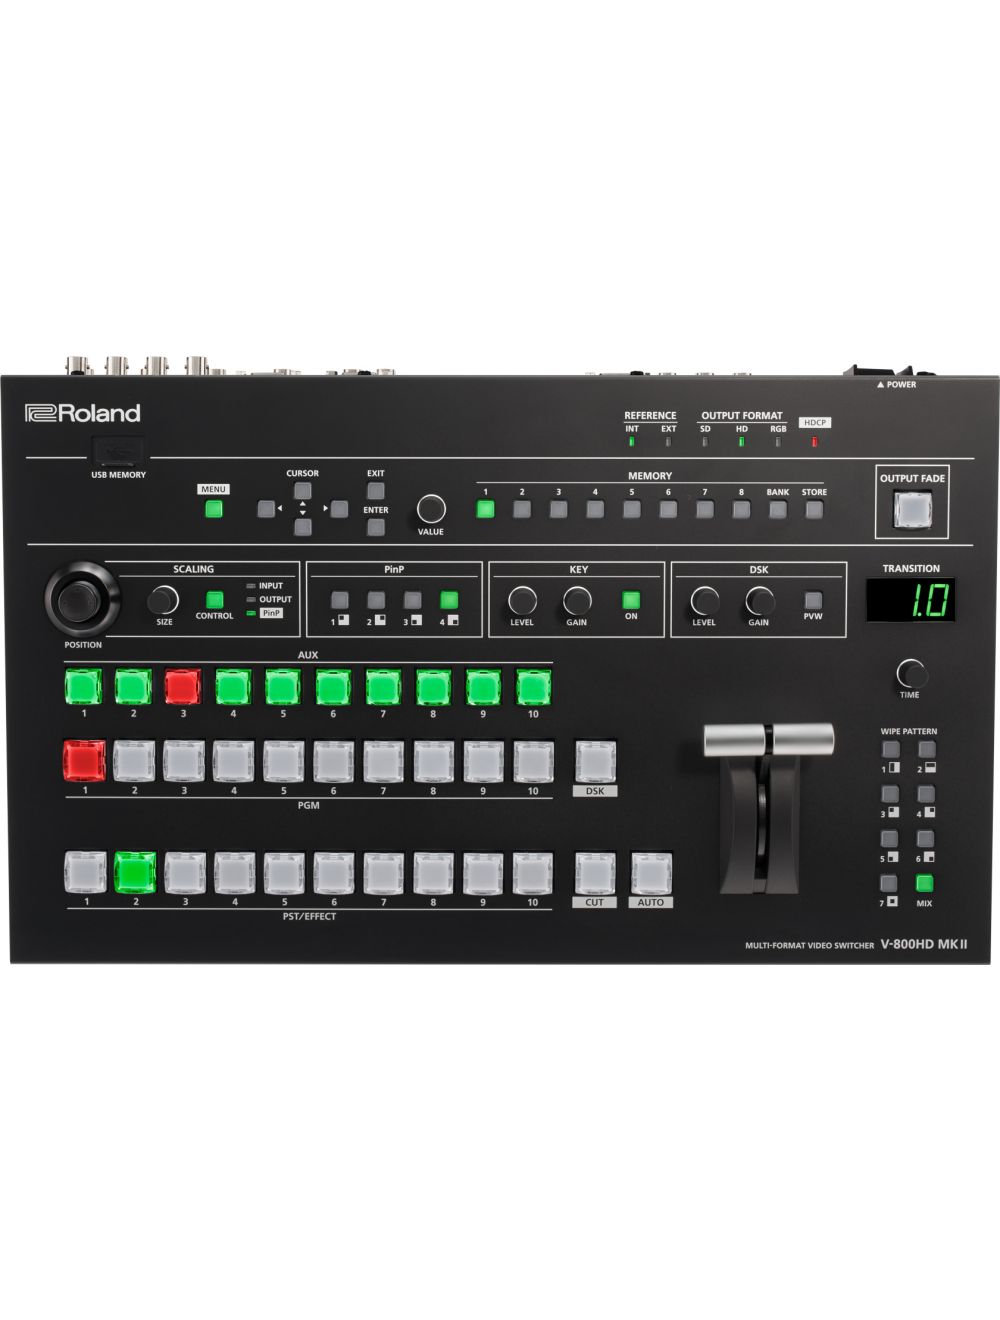 Clancy settlement Universal Roland V-800HD Multi-Format Video Switcher V-800HD Core Microsys